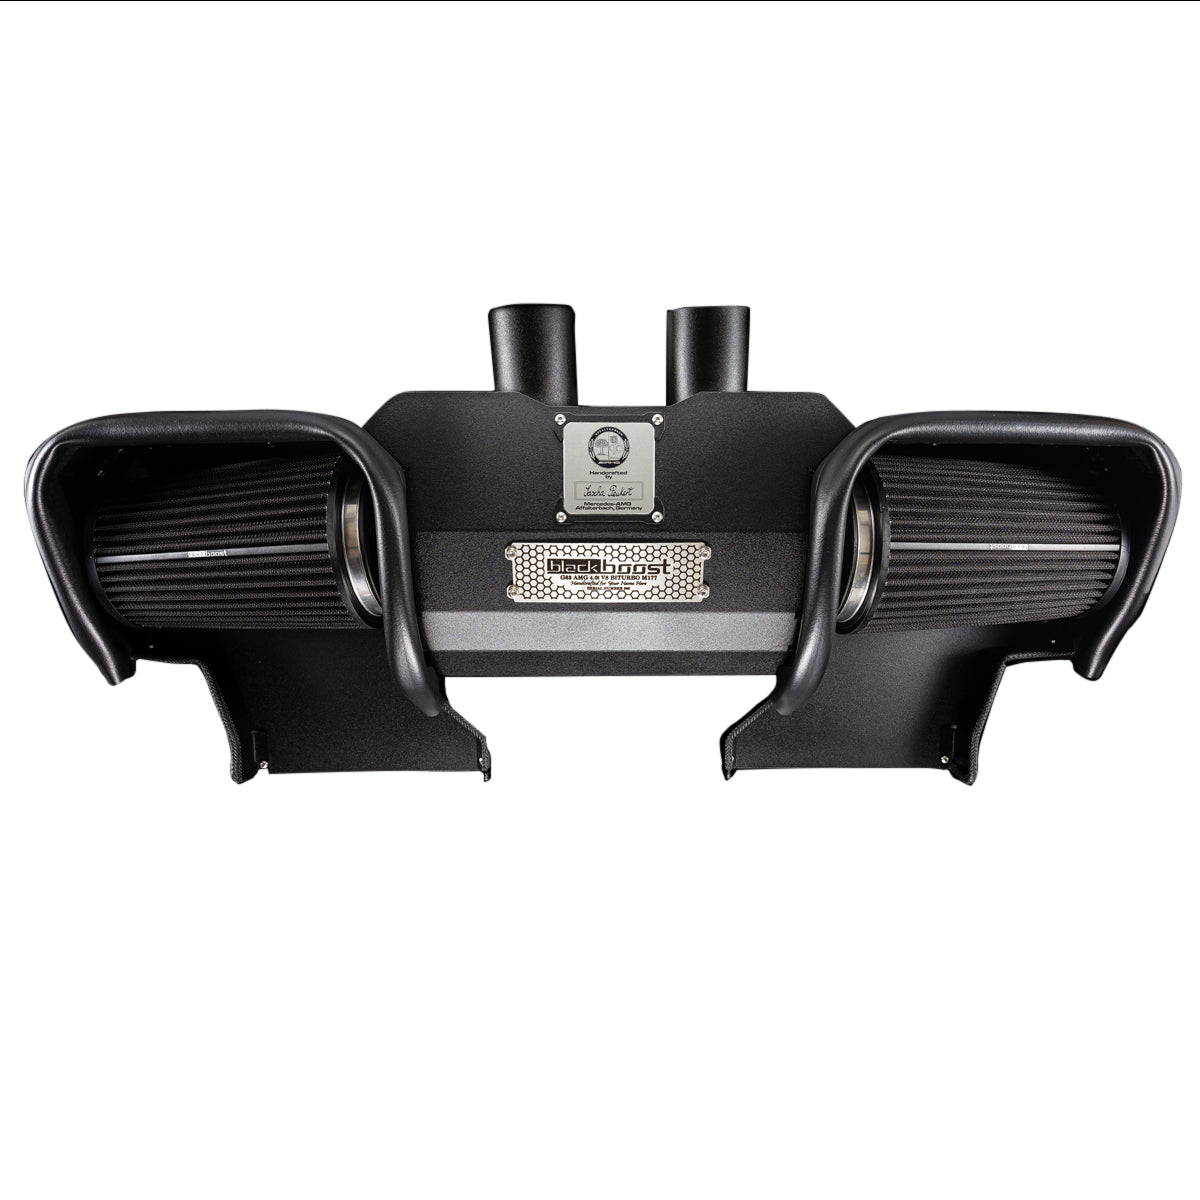 BLACKBOOST BBCAIS015 Cold Air Intake System for Mercedes Benz G63 (W463A) M177 Photo-0 